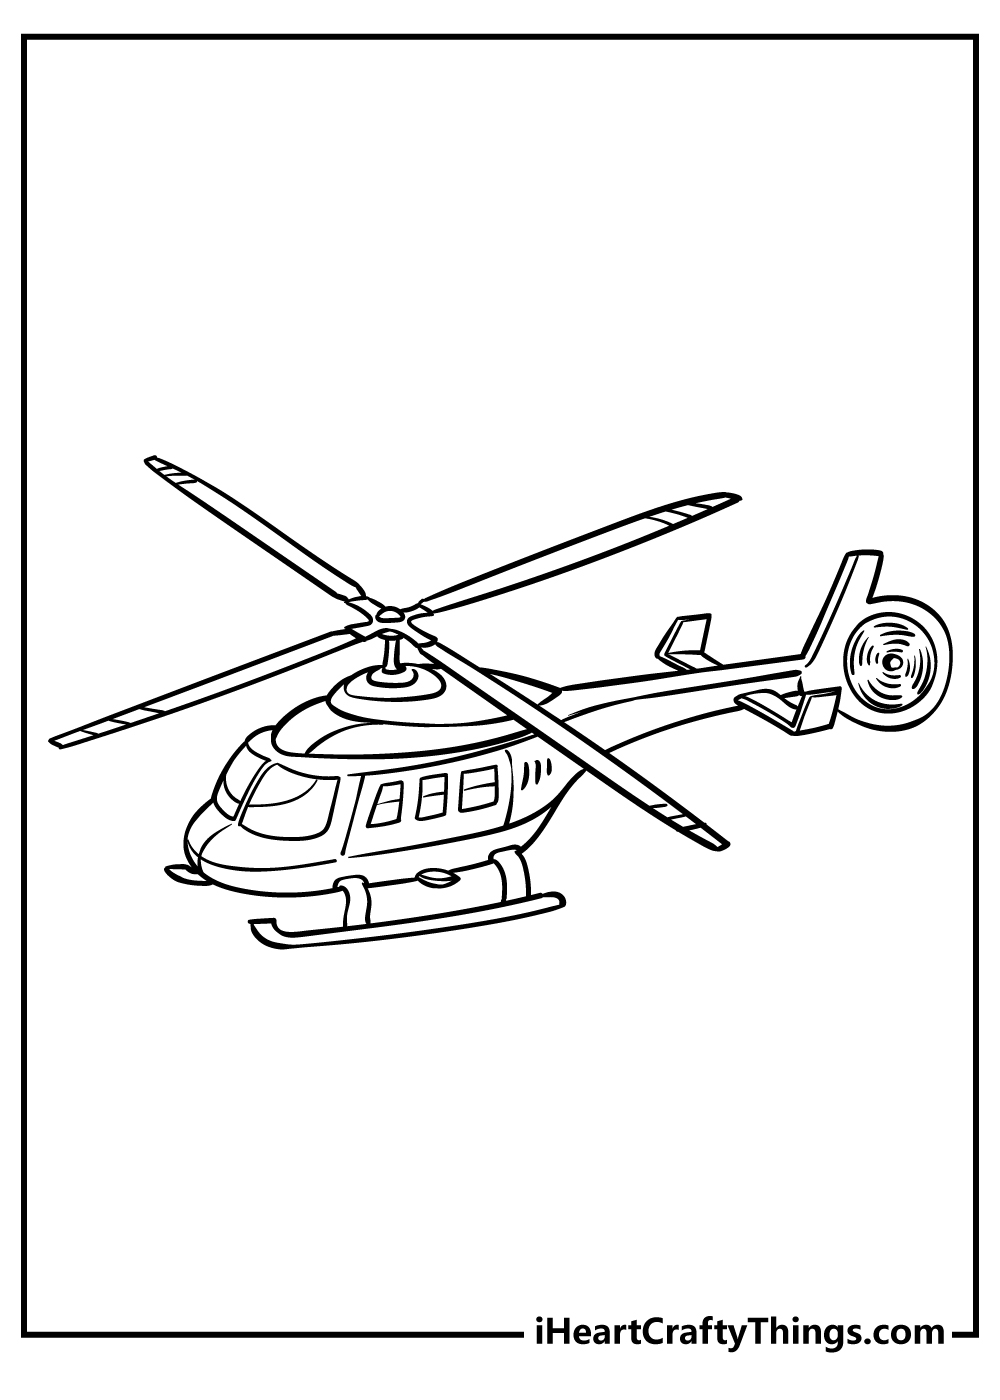 Helicopter Coloring Original Sheet for children free download